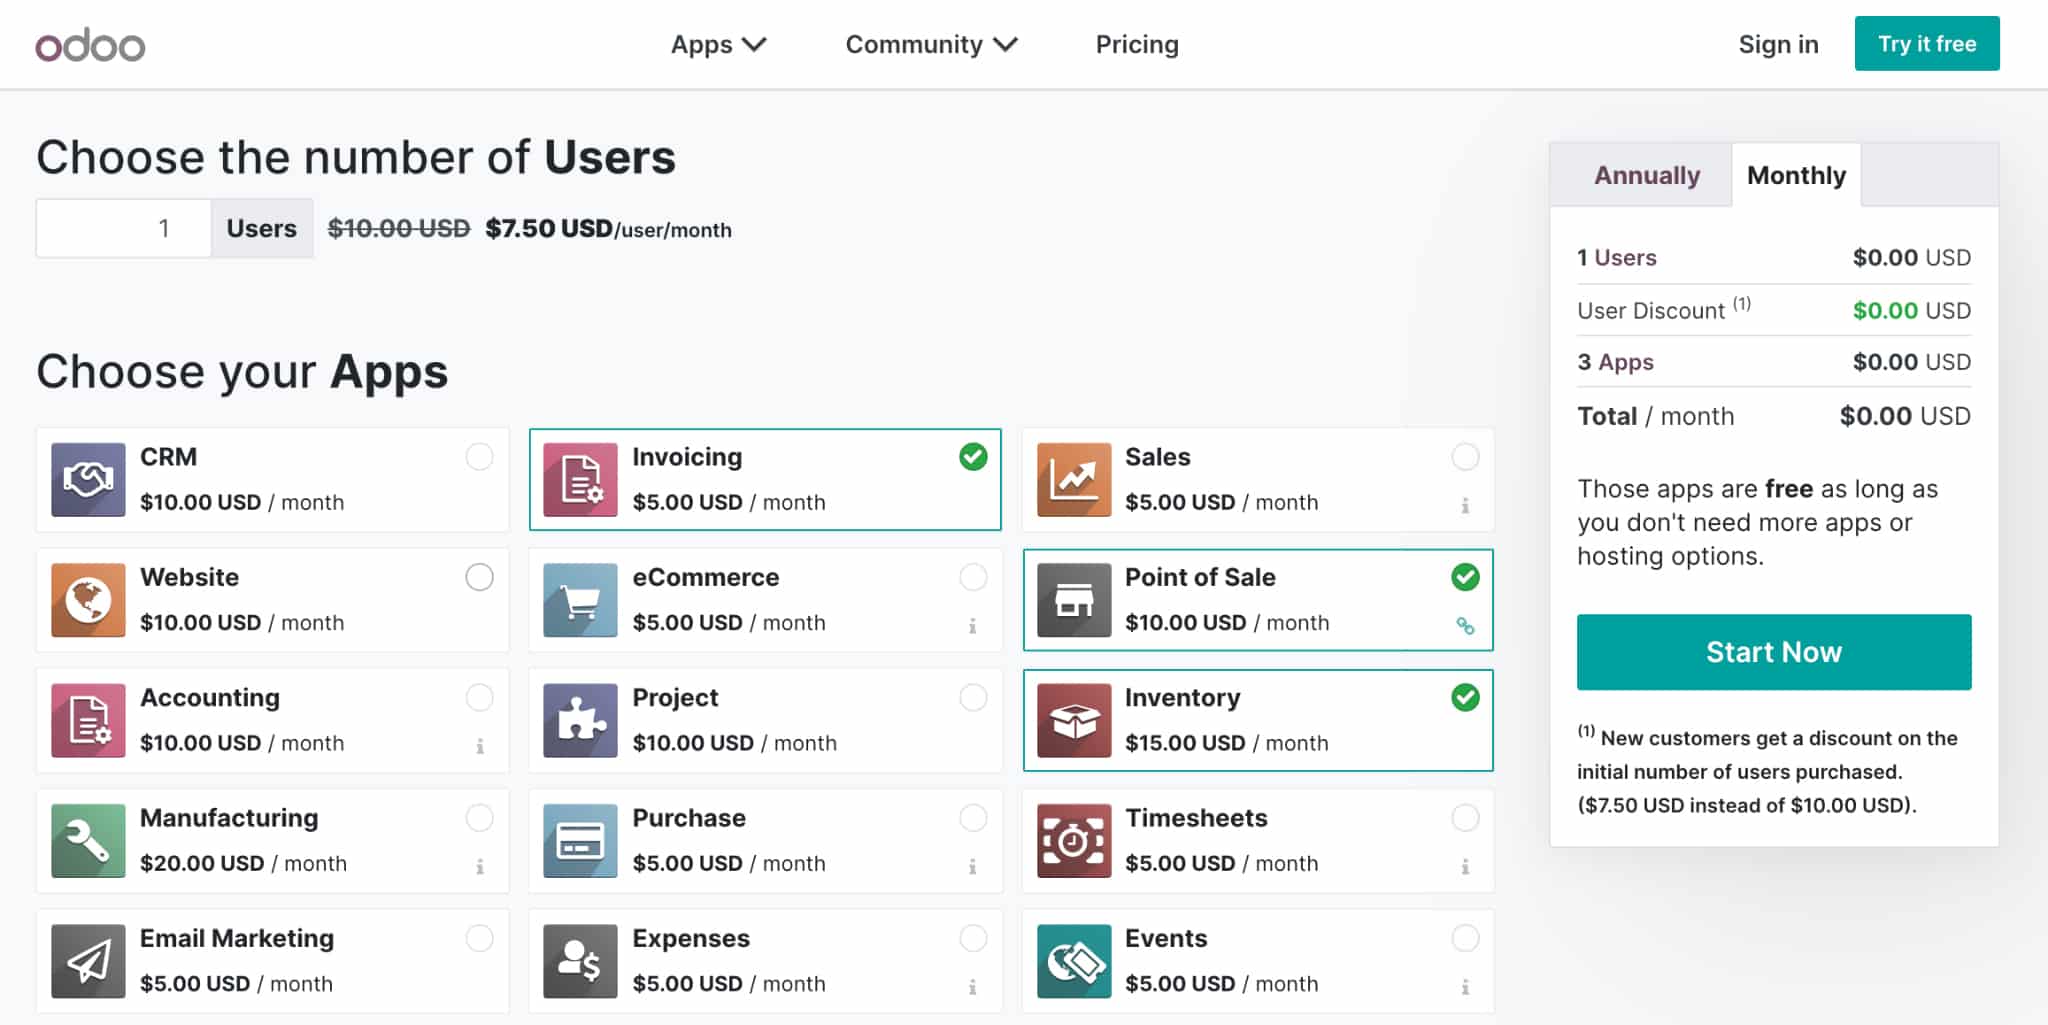 Screenshot of Odoo Invoicing and Inventory apps